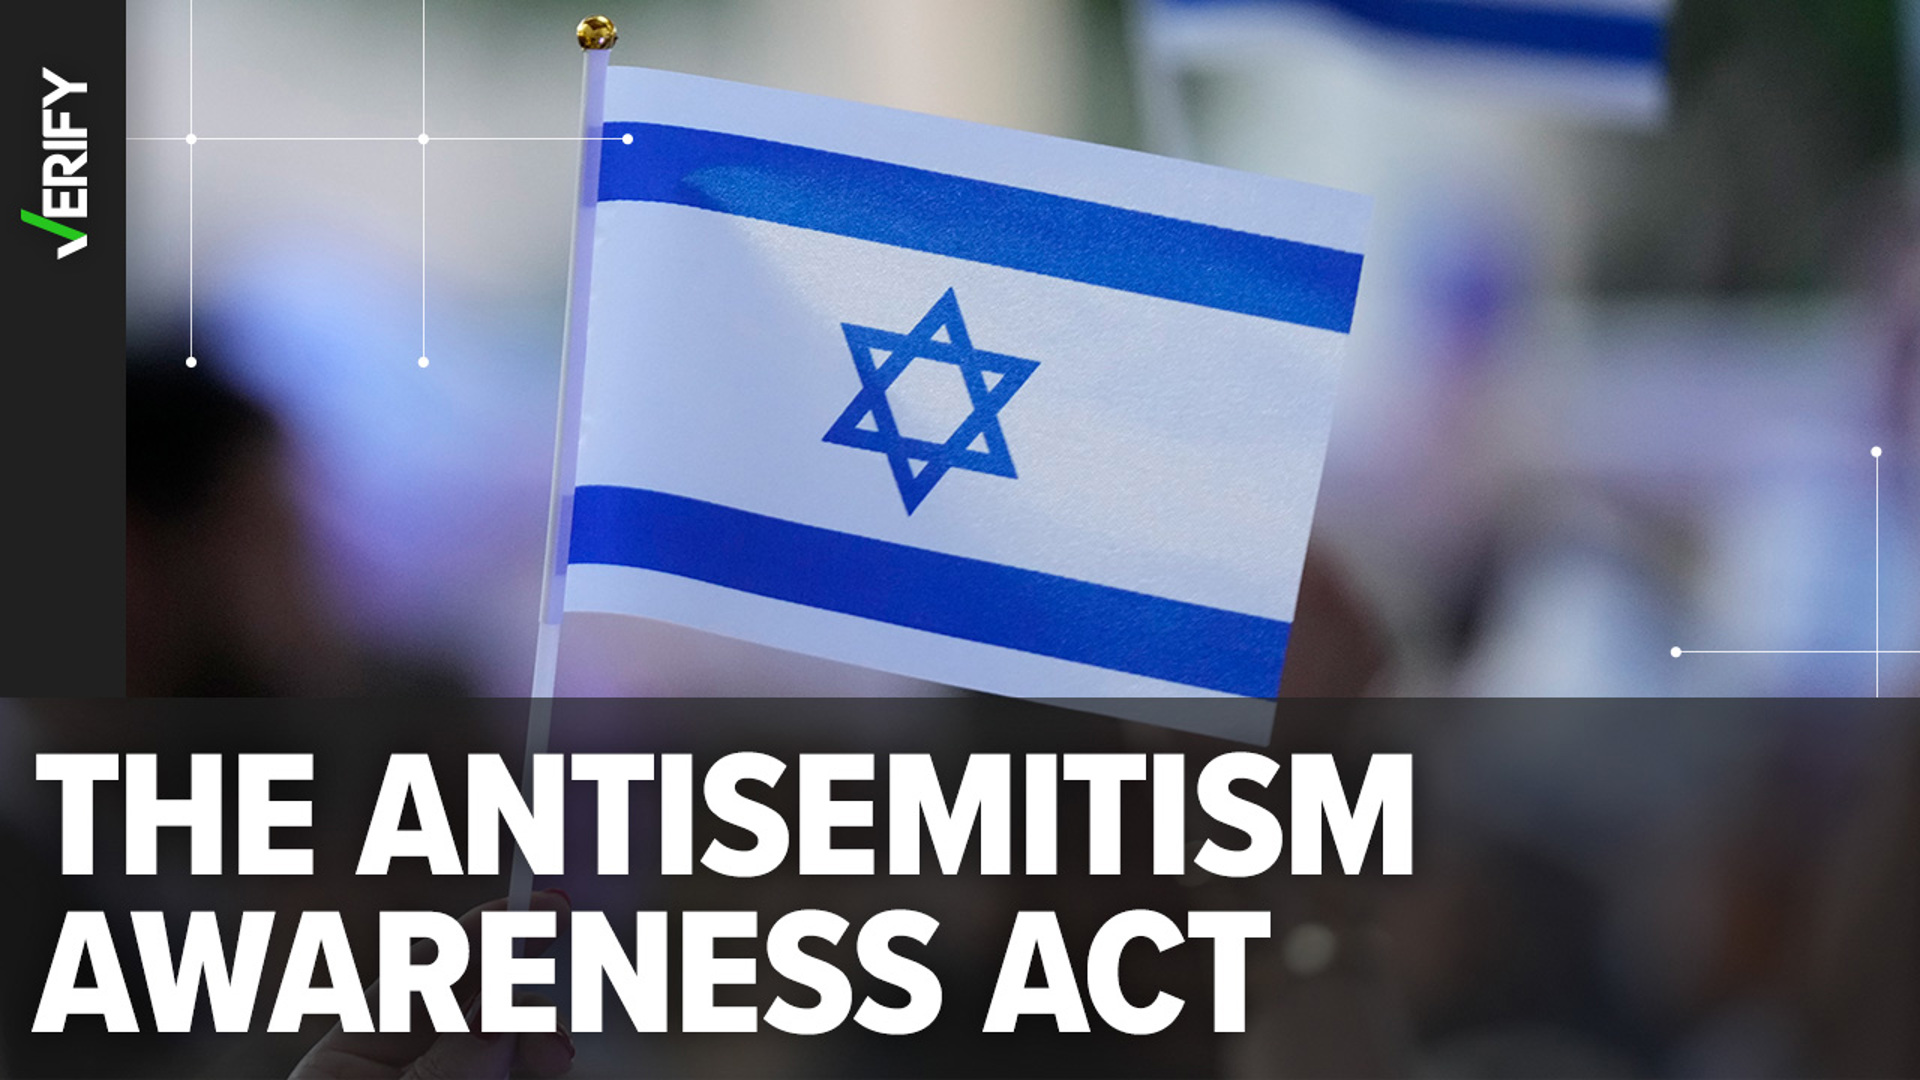 Here's what we can VERIFY about the Antisemitism Awareness Act ...